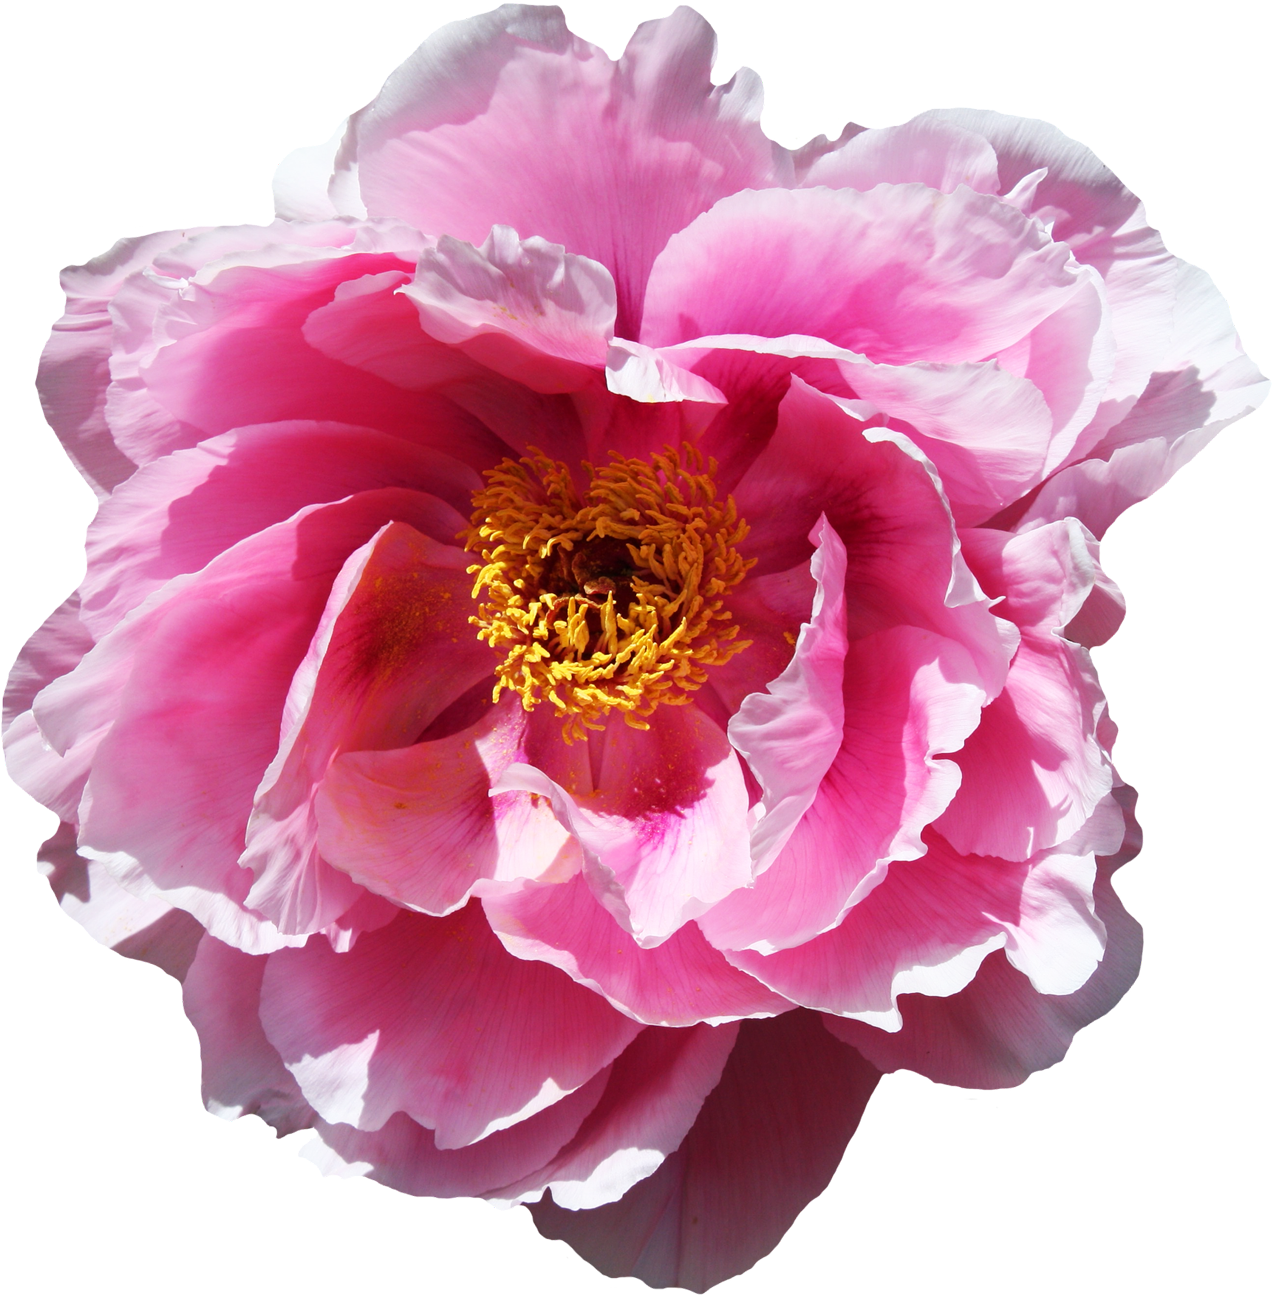 Rose Flower Png Image - Portable Network Graphics (1400x1418)